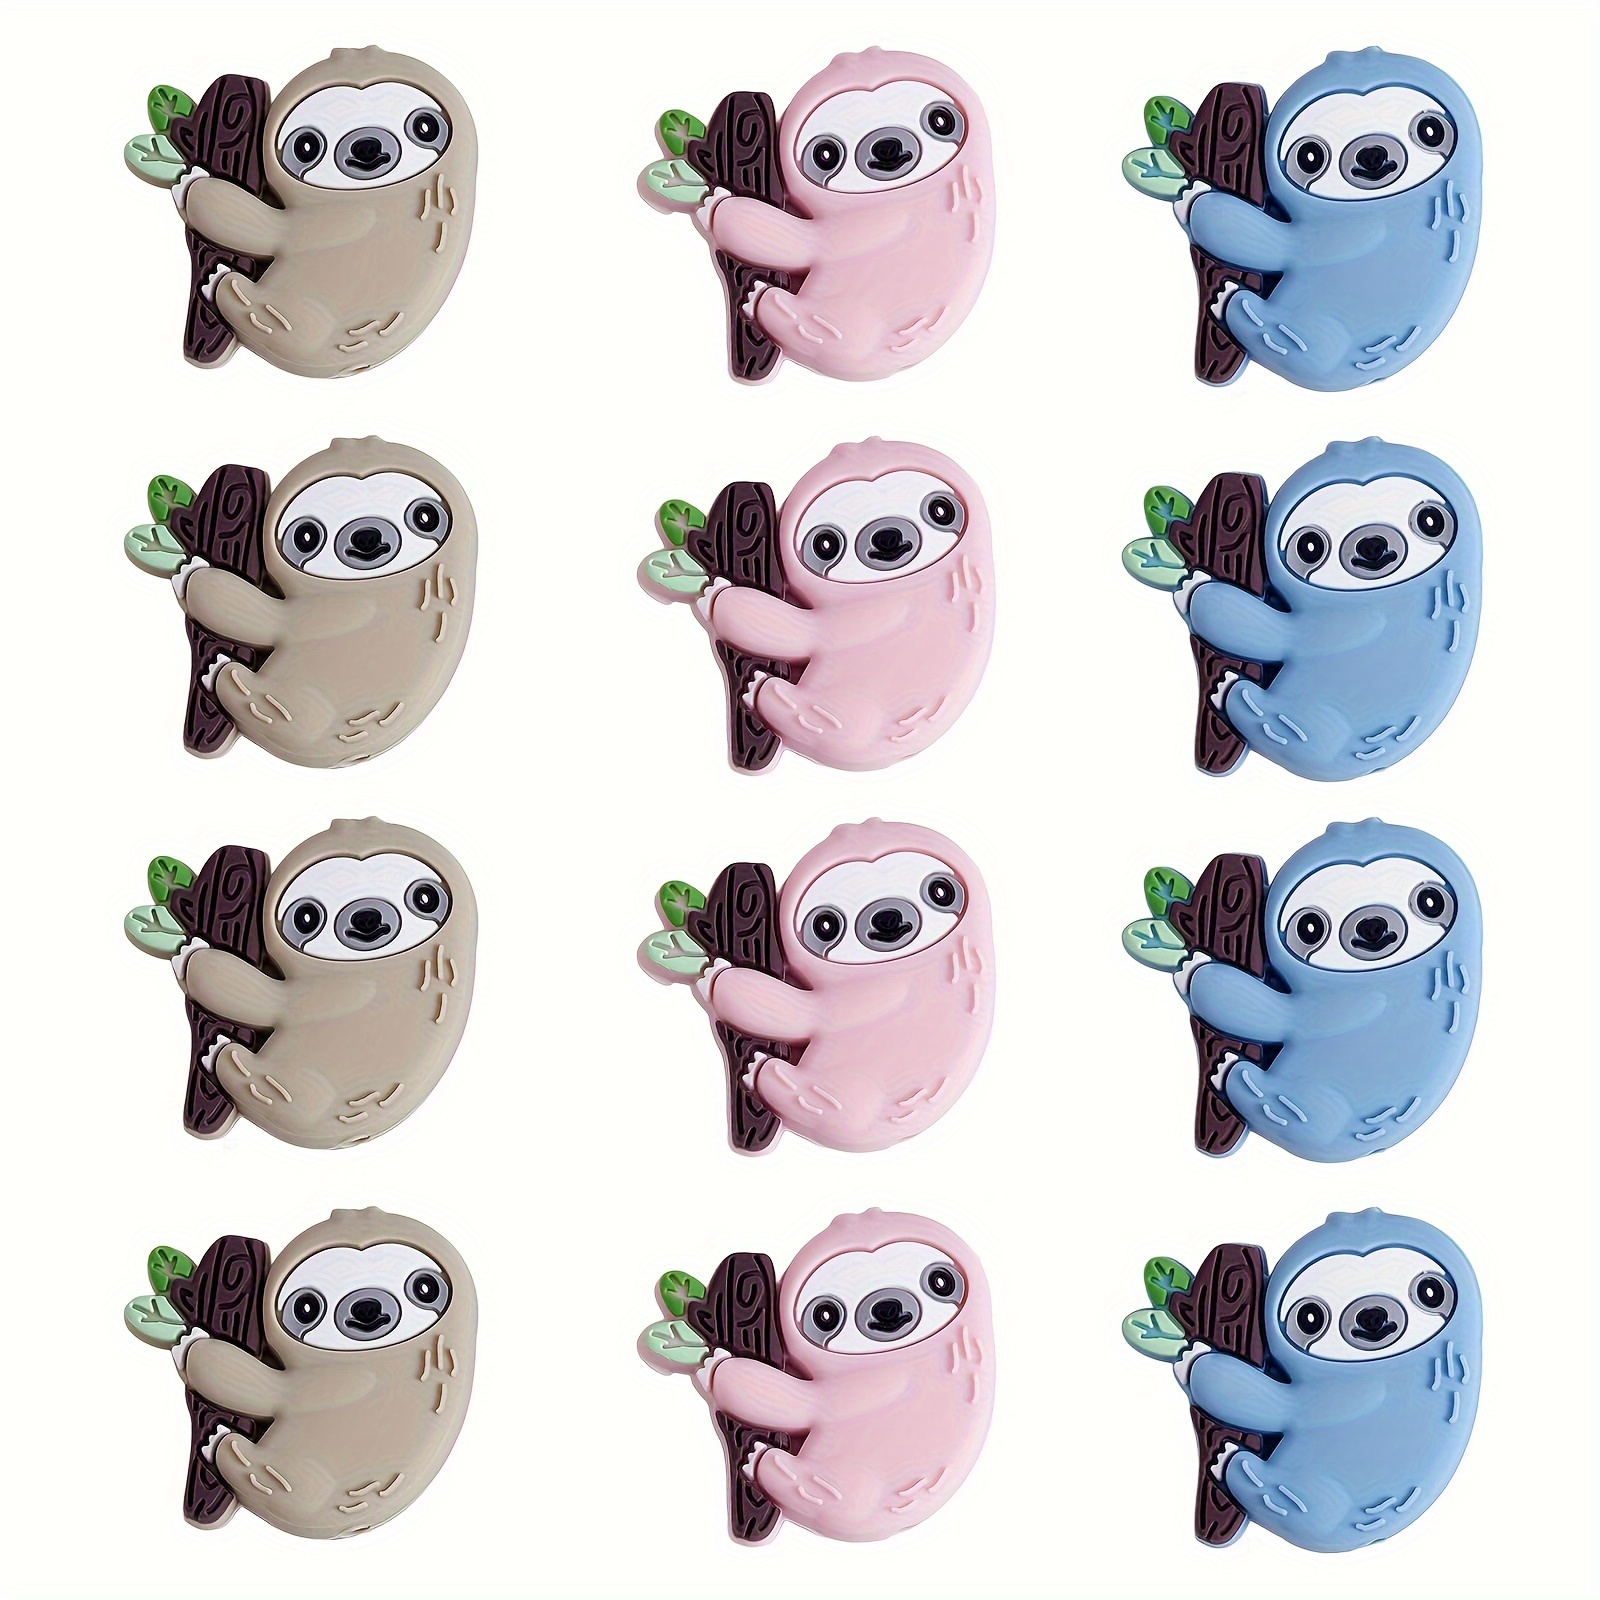 

12pcs Cute Sloth Silicone Bulk Beads For Jewelry Making Diy Creative Special Various Handicrafts, Beaded Pen, Phone Straps, Bag Pendants Accessories